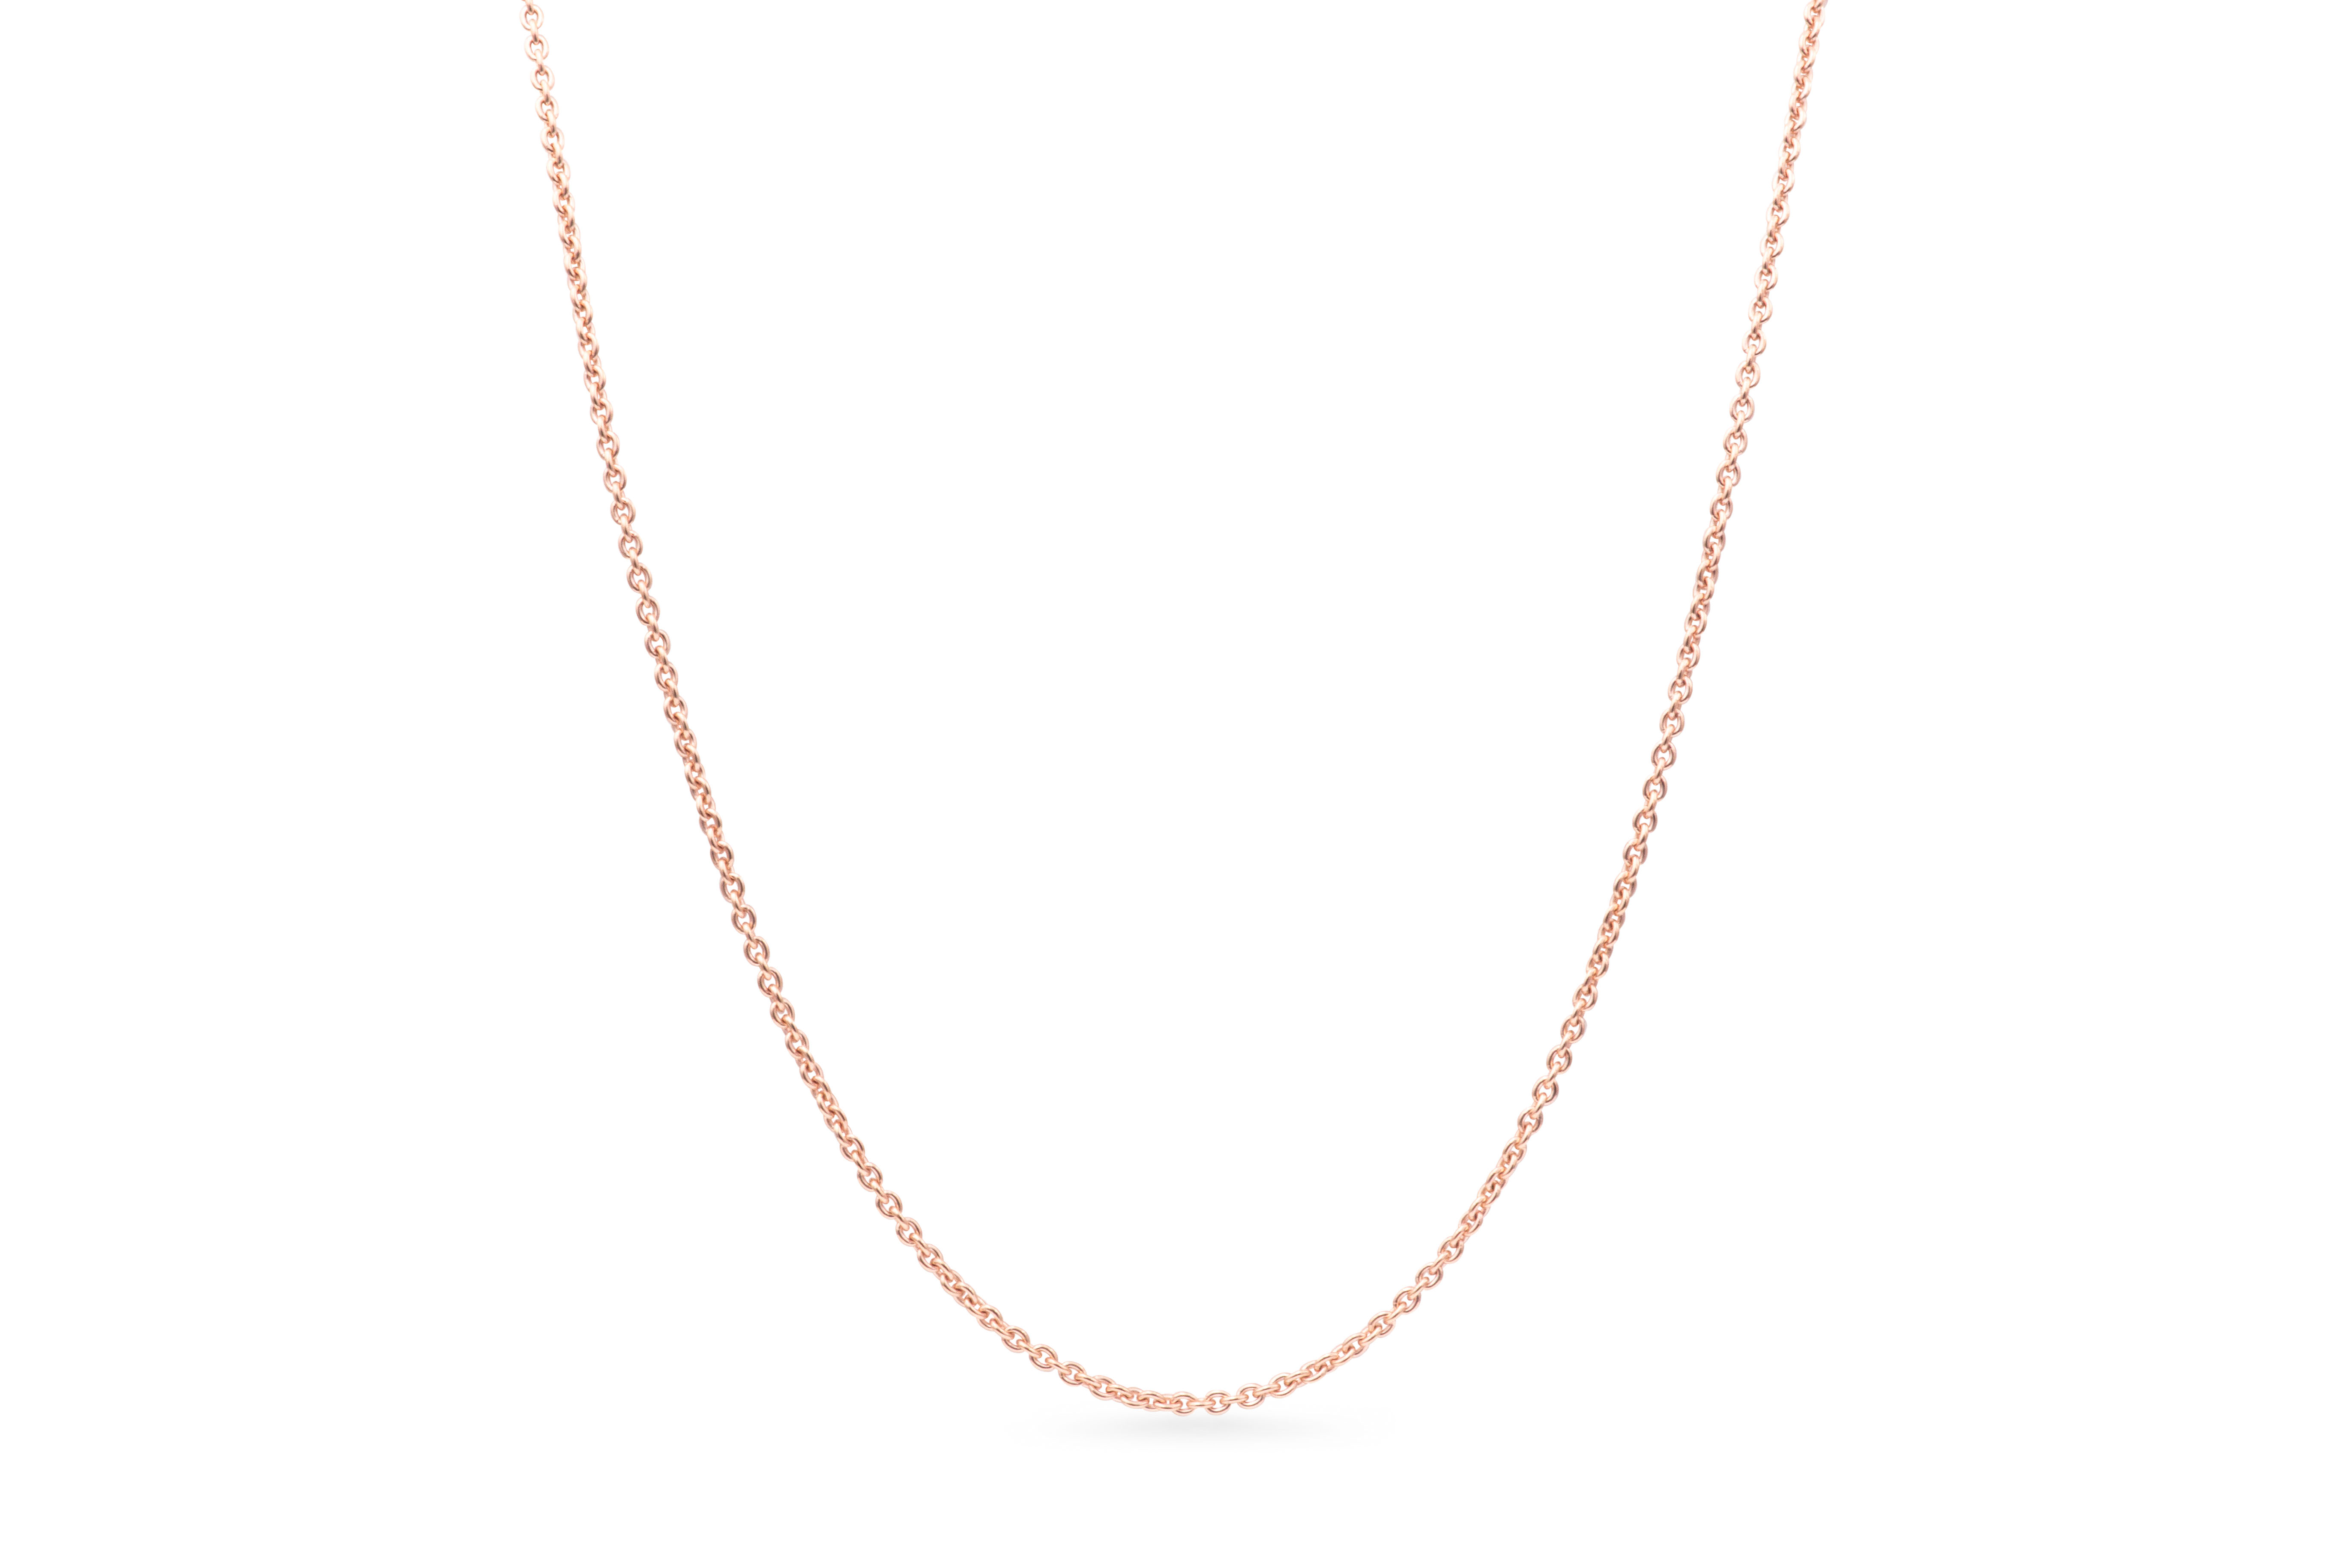 PANDORA Sterling Silver Chain with 14k Rose Gold Plating 45 cm/17.7 in